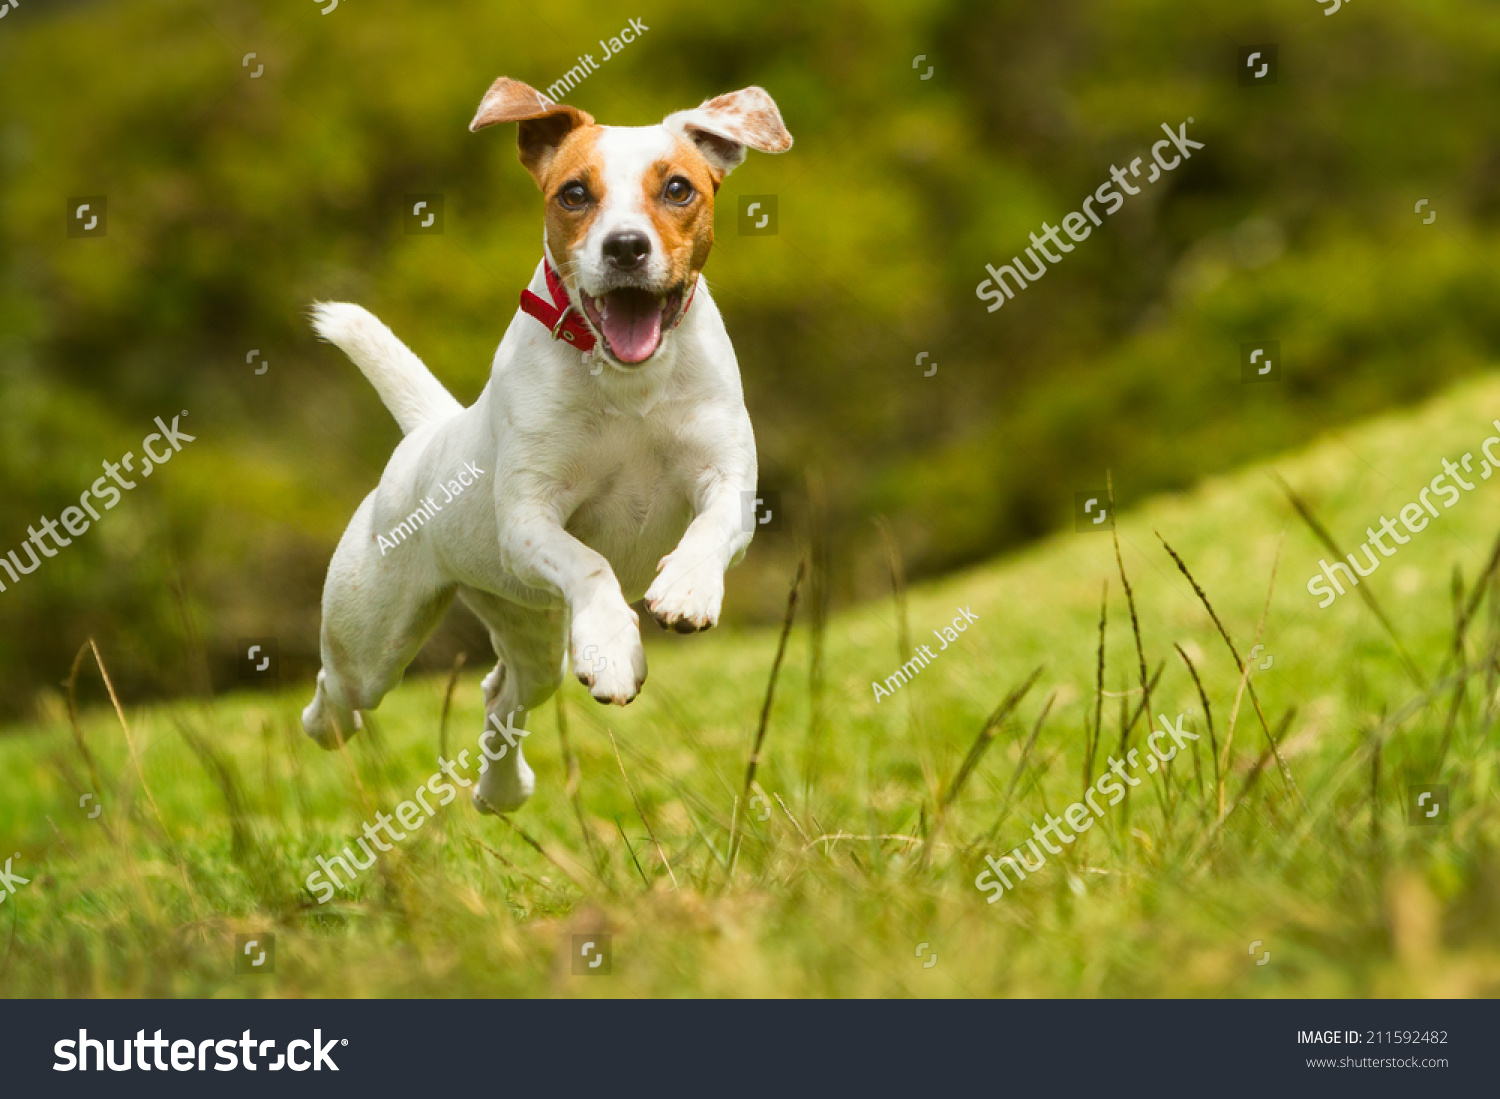 Jack Russel Parson Dog Run Toward The Camera Low Angle High Speed Shot #211592482